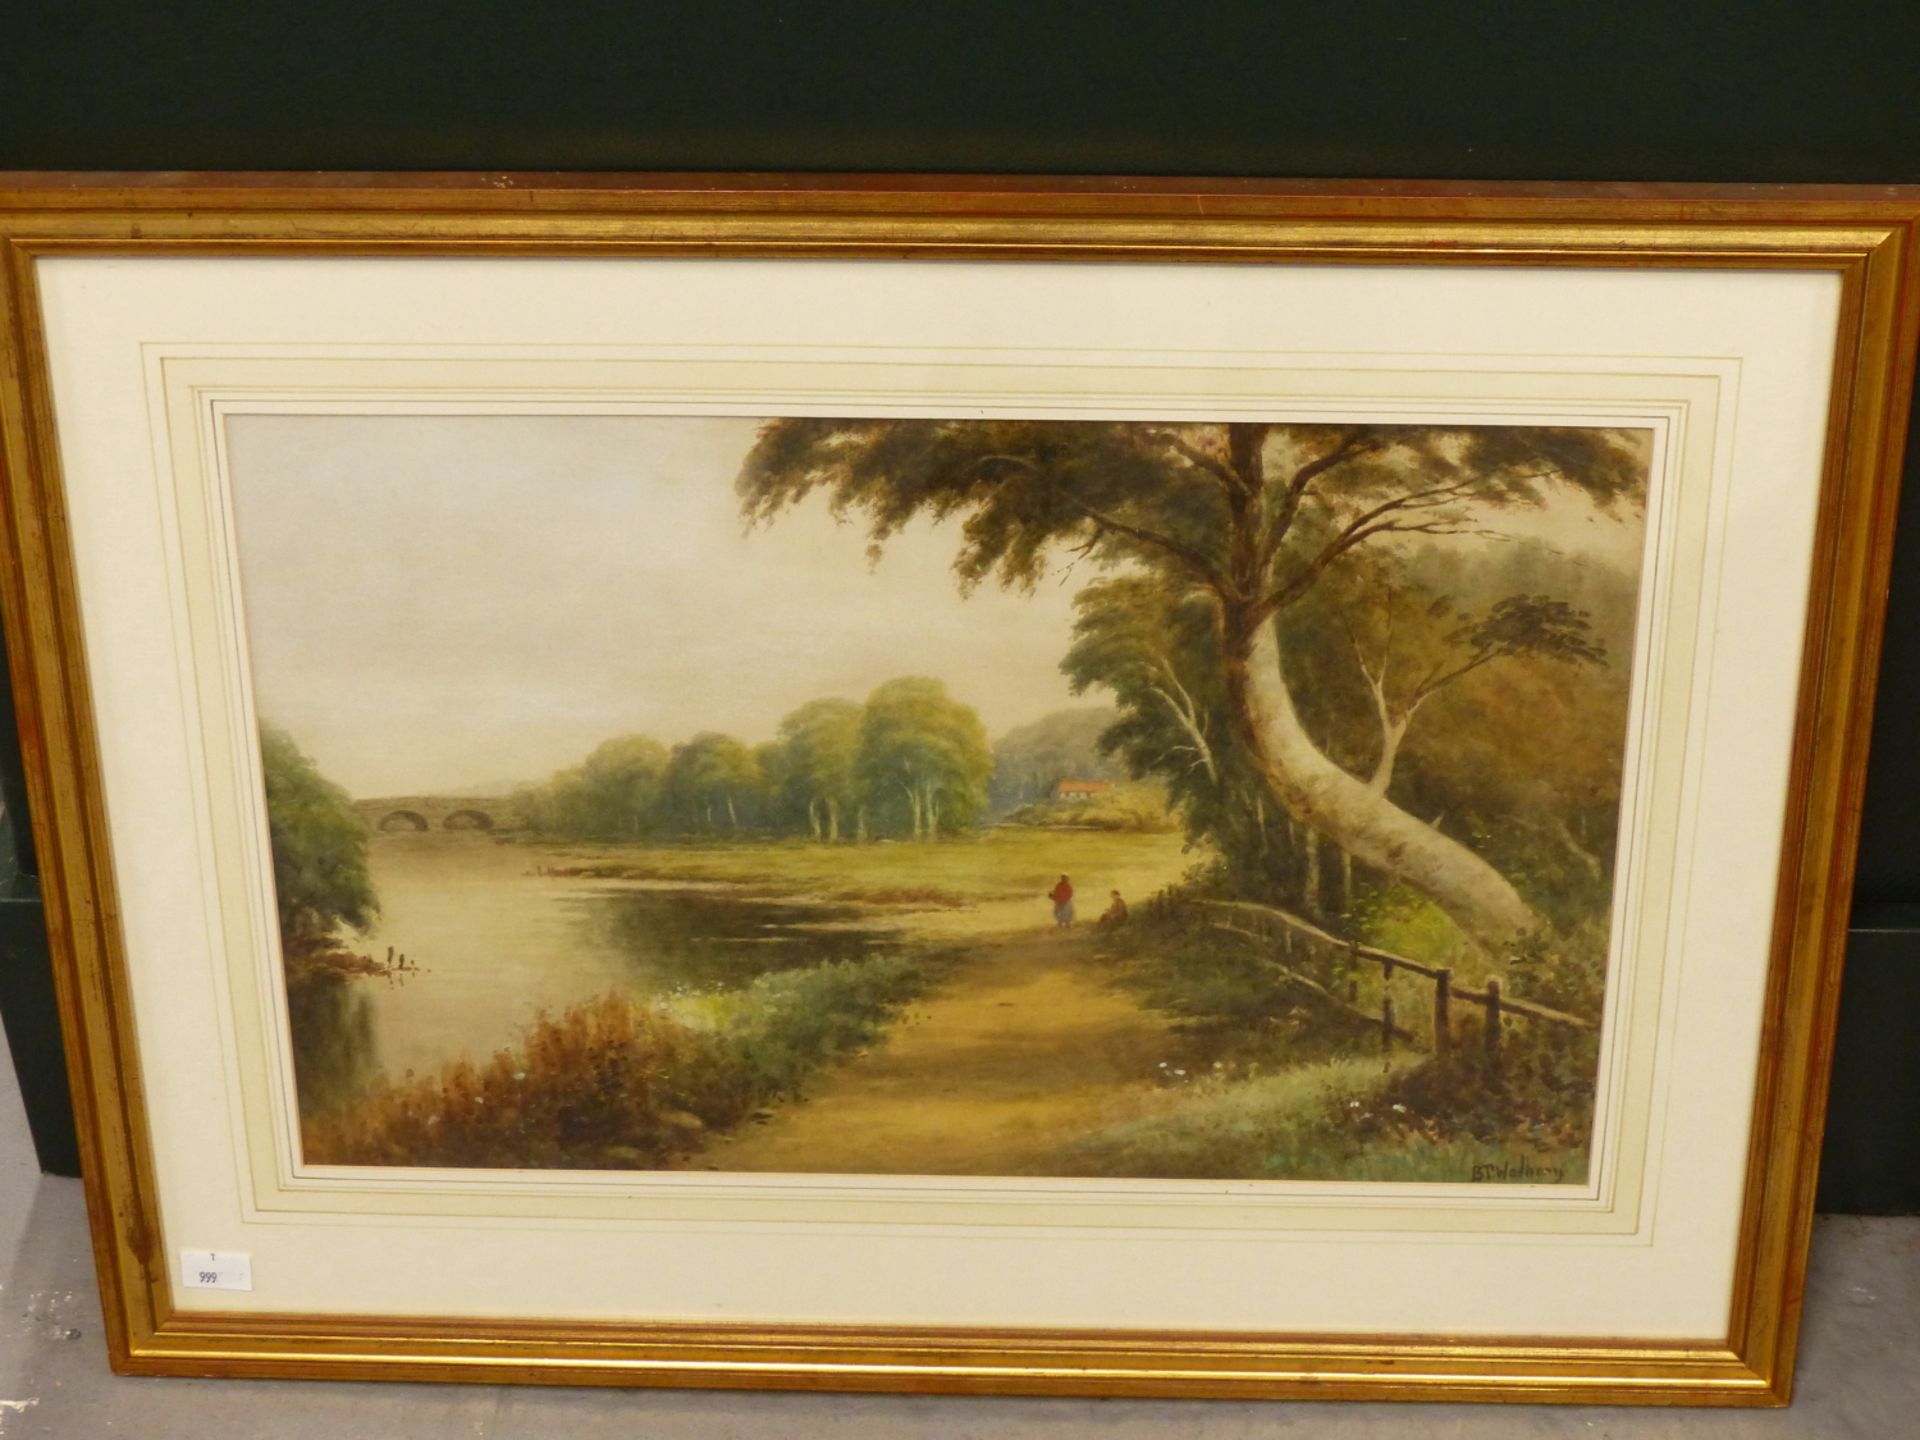 B. T WADHAM. (19TH/20TH CENTURY) THE TOWPATH -SONNING. WATERCOLOUR, SIGNED LOWER RIGHT 47 X 30 cm - Image 2 of 8